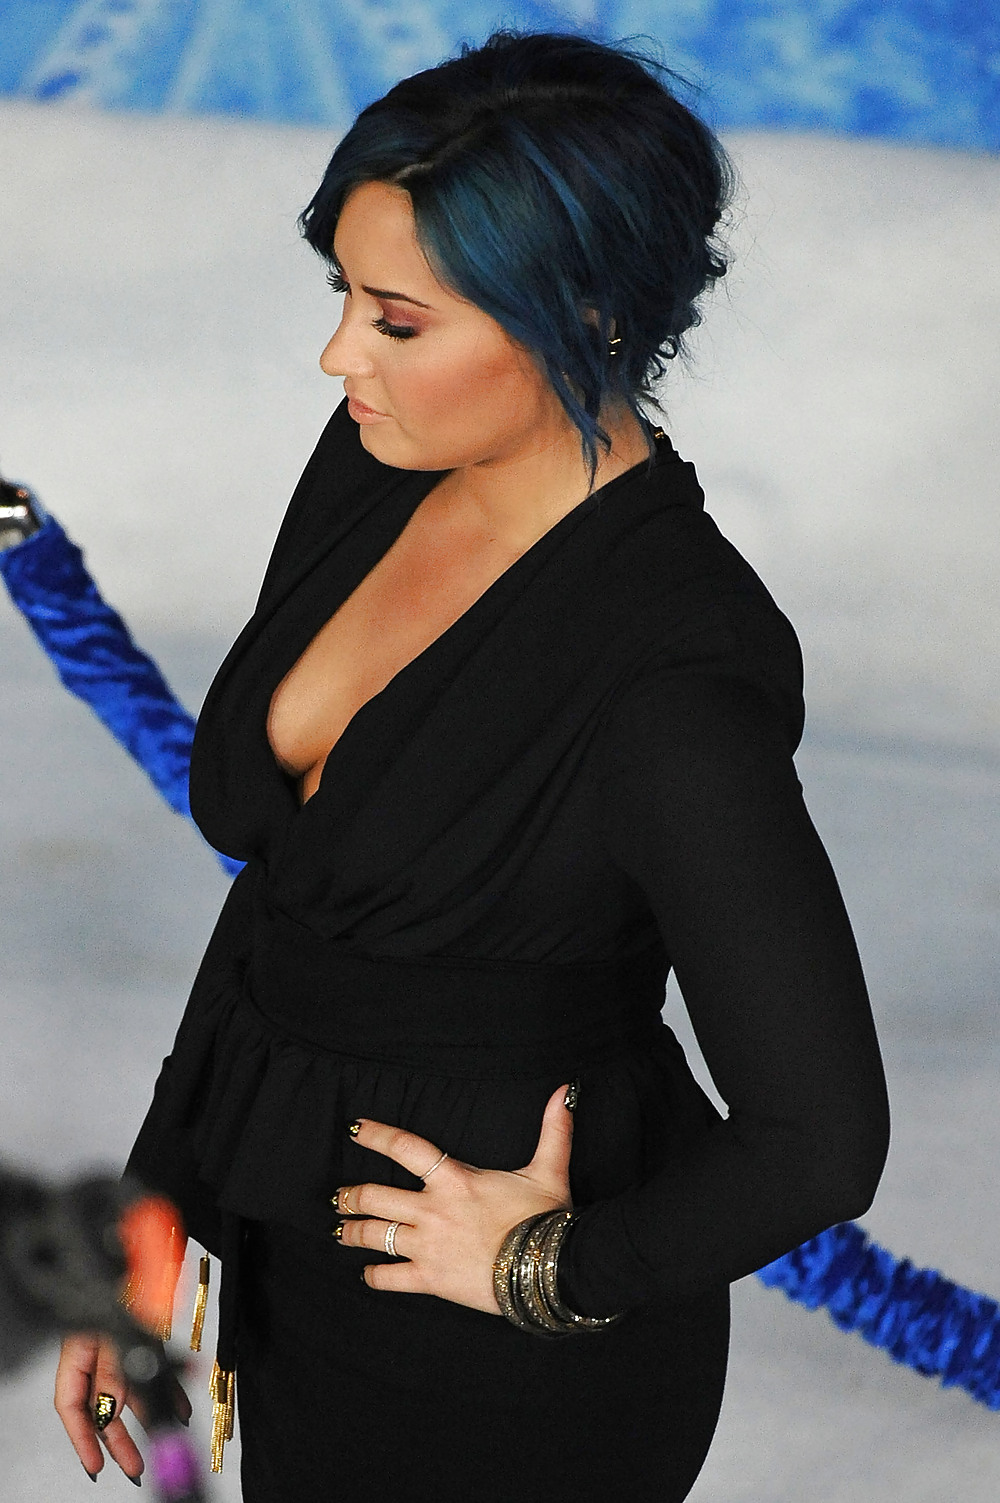 Demi Lovato with blue hair and business style #22180064